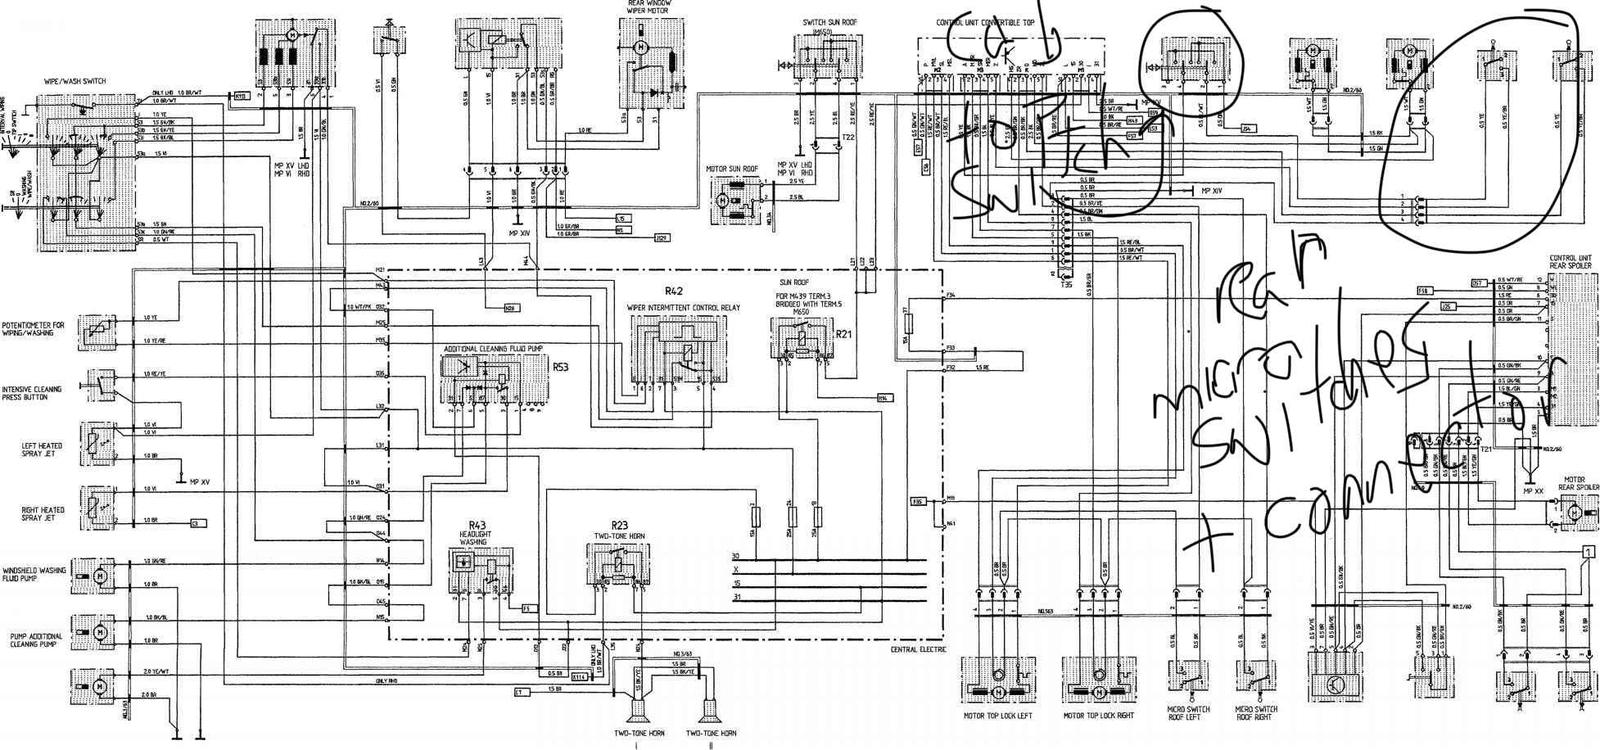 DIAGRAM 2001 Saab 93 Convertible Wiring Harness FULL Version HD Quality Wiring Harness ...